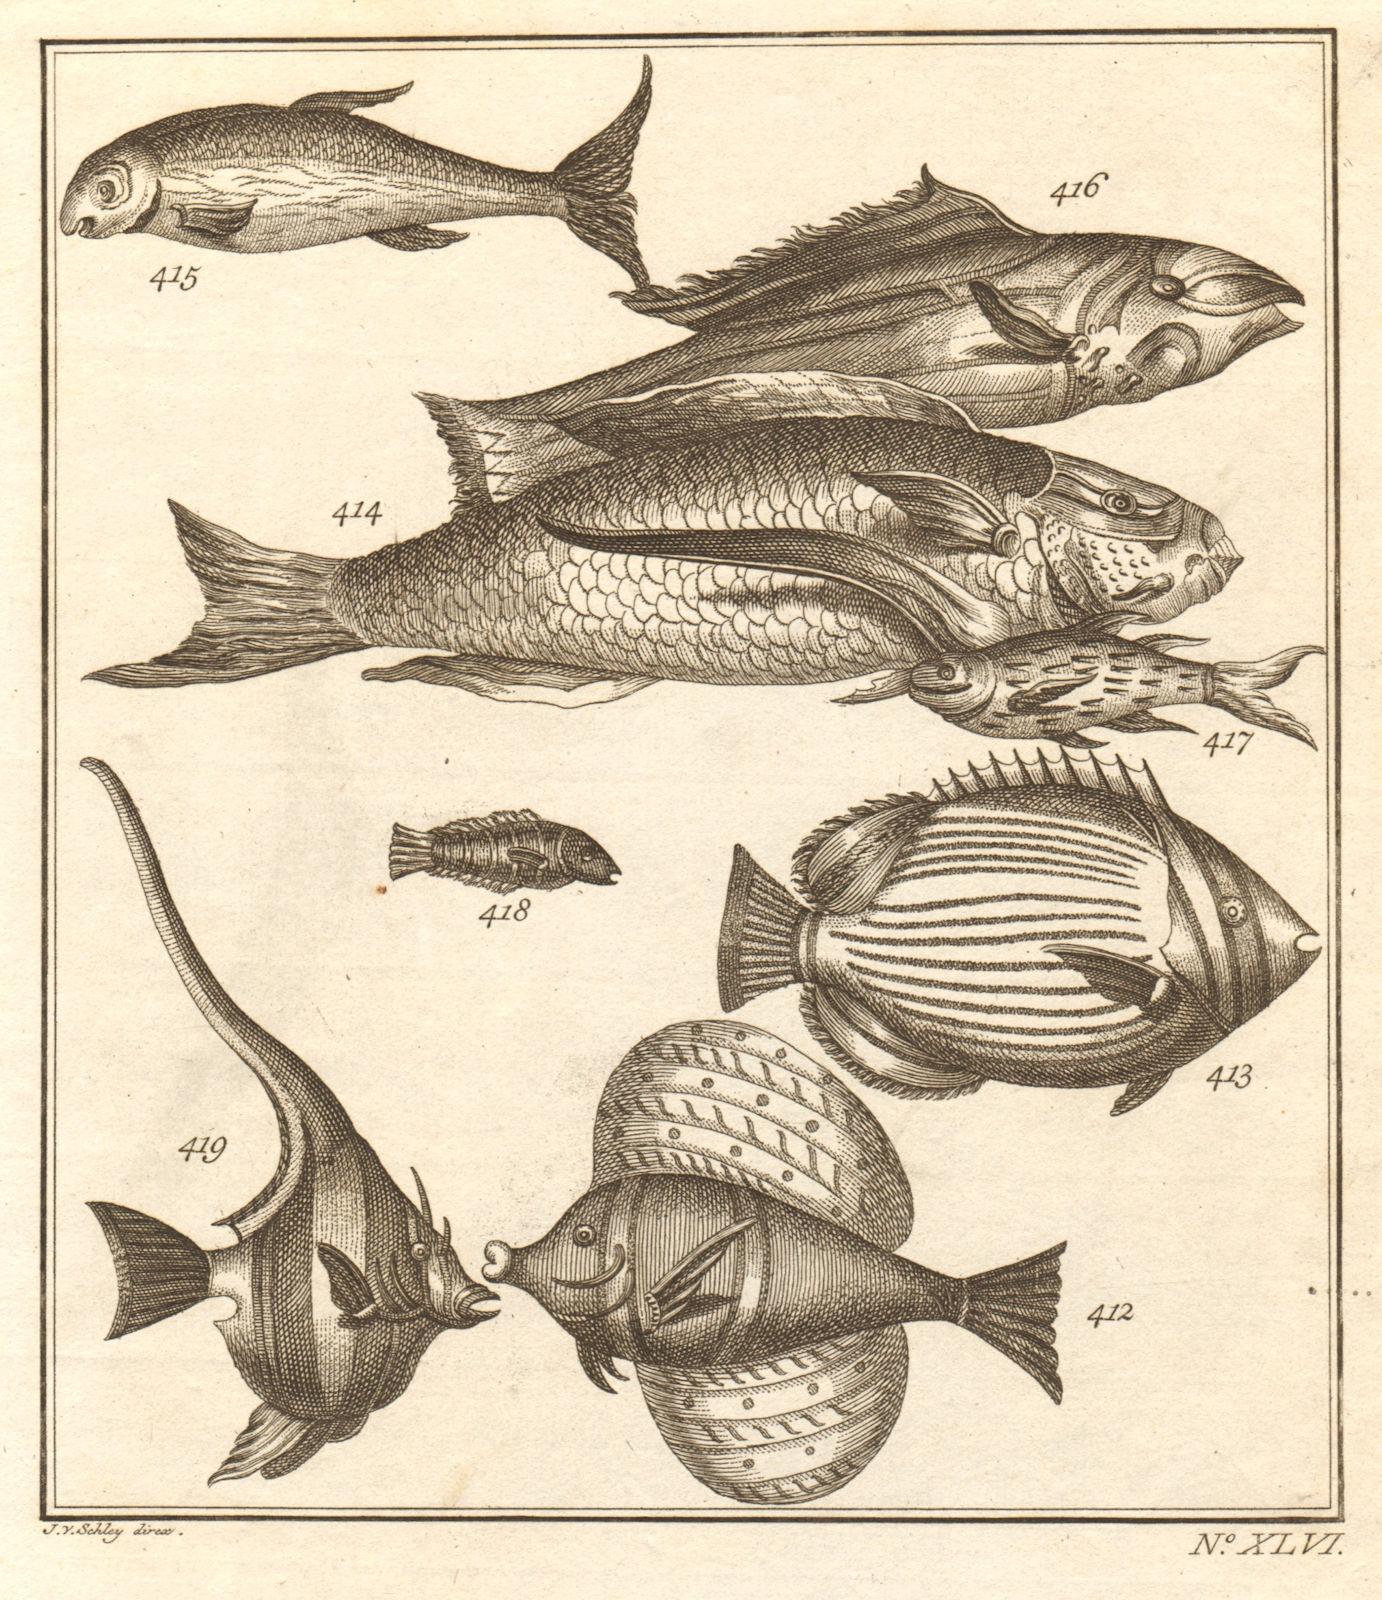 Associate Product XLVI. Poissons d'Ambione. Indonesia Moluccas Maluku tropical fish. SCHLEY 1763